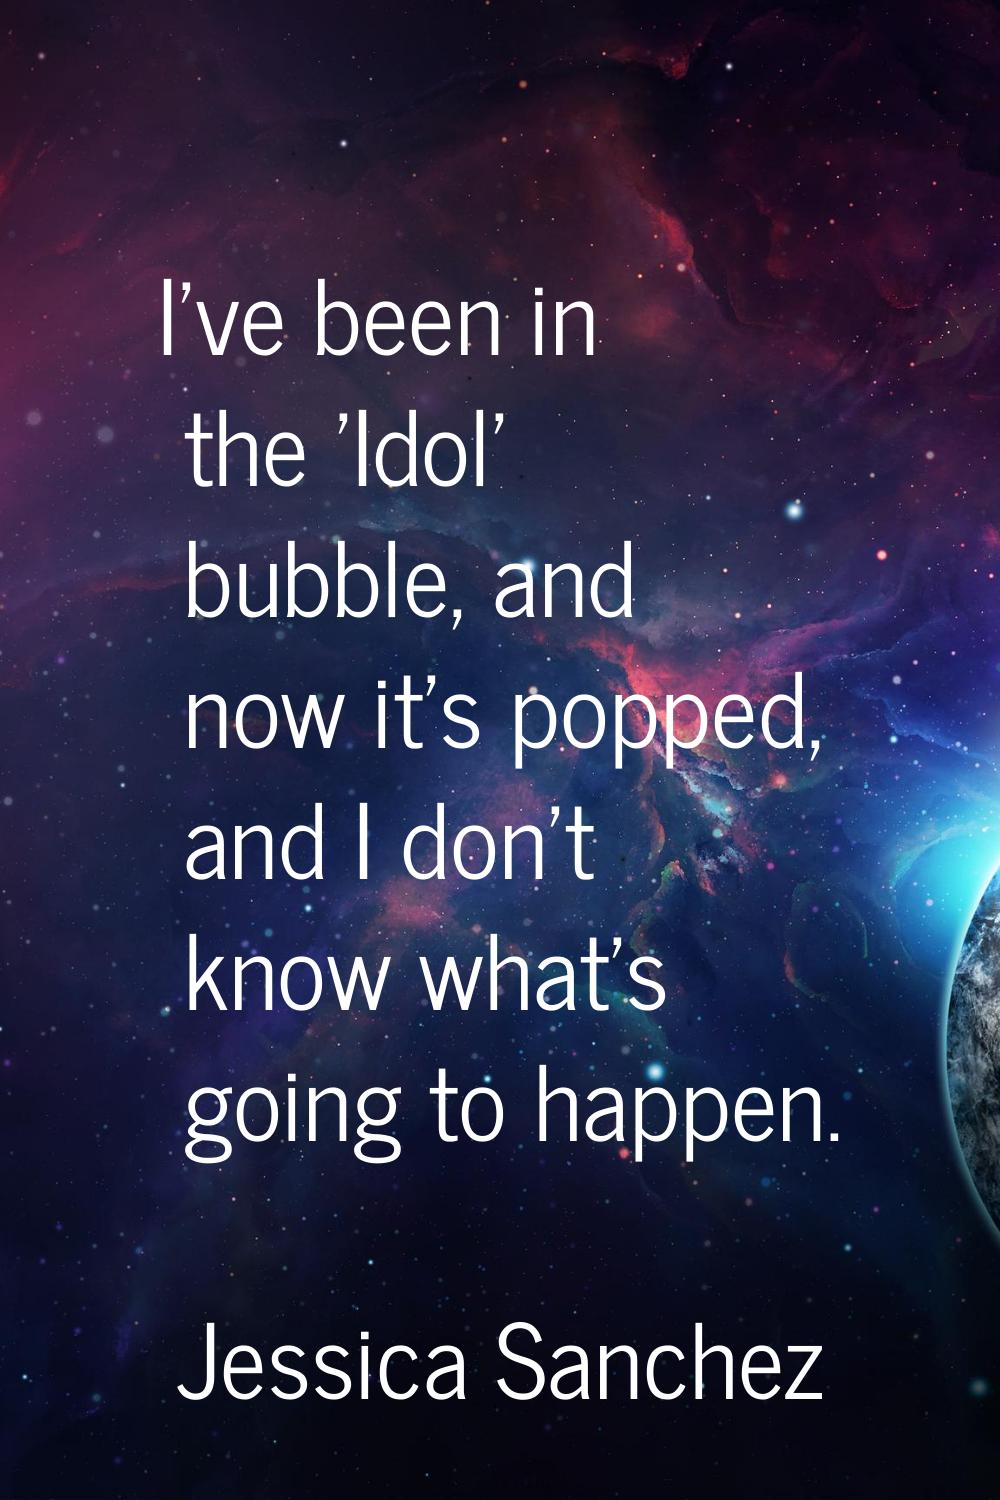 I've been in the 'Idol' bubble, and now it's popped, and I don't know what's going to happen.